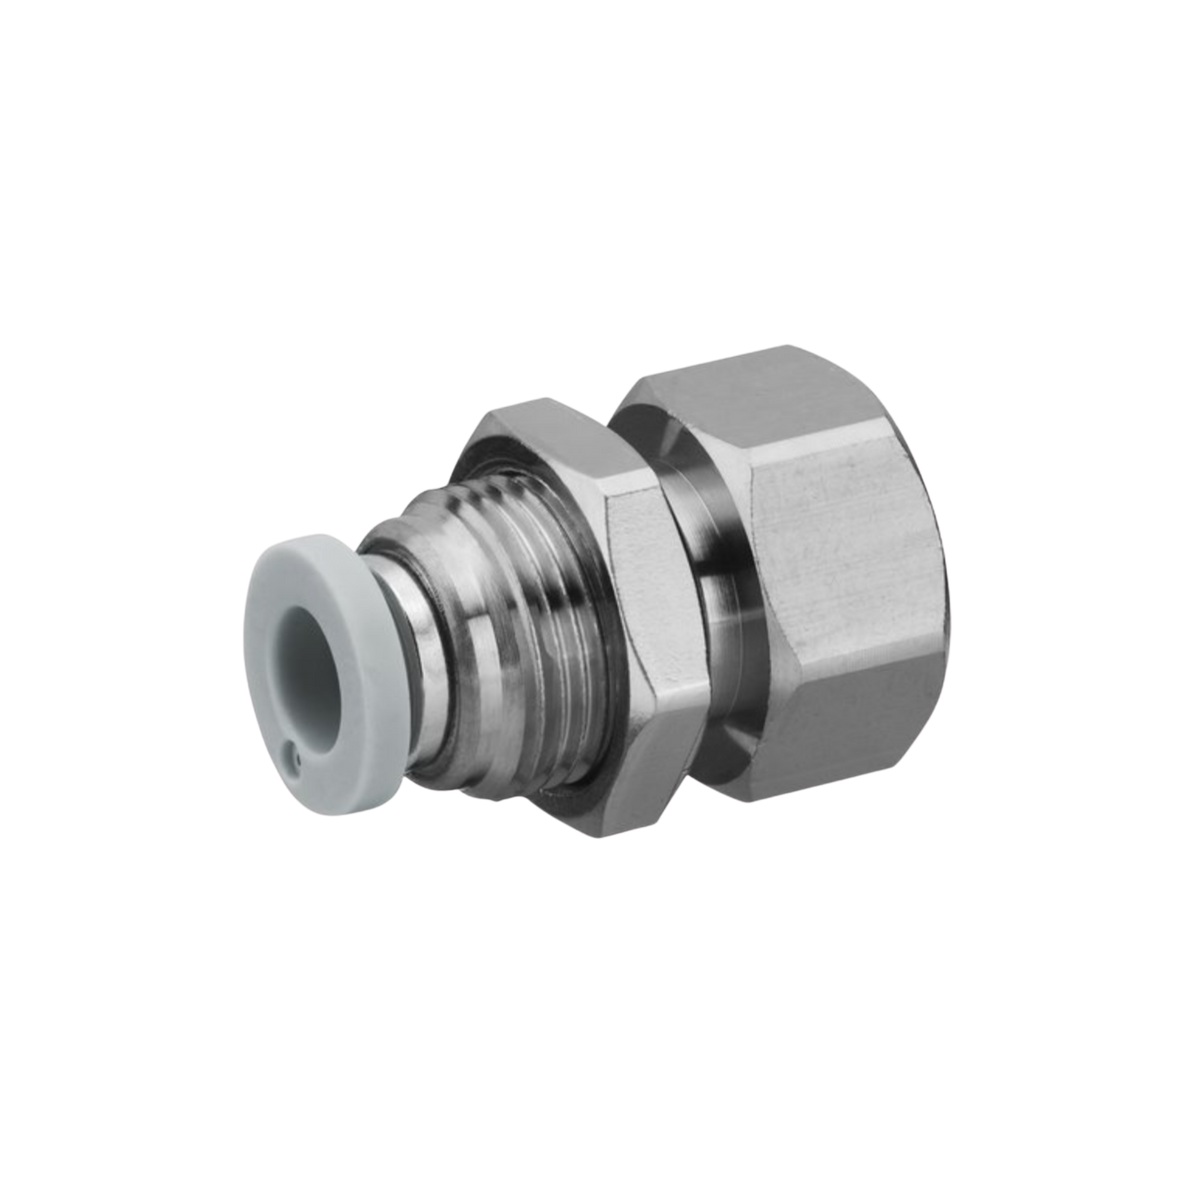 Staright metal hex shaped bulkhead connector. female push in fitting with internal thread.